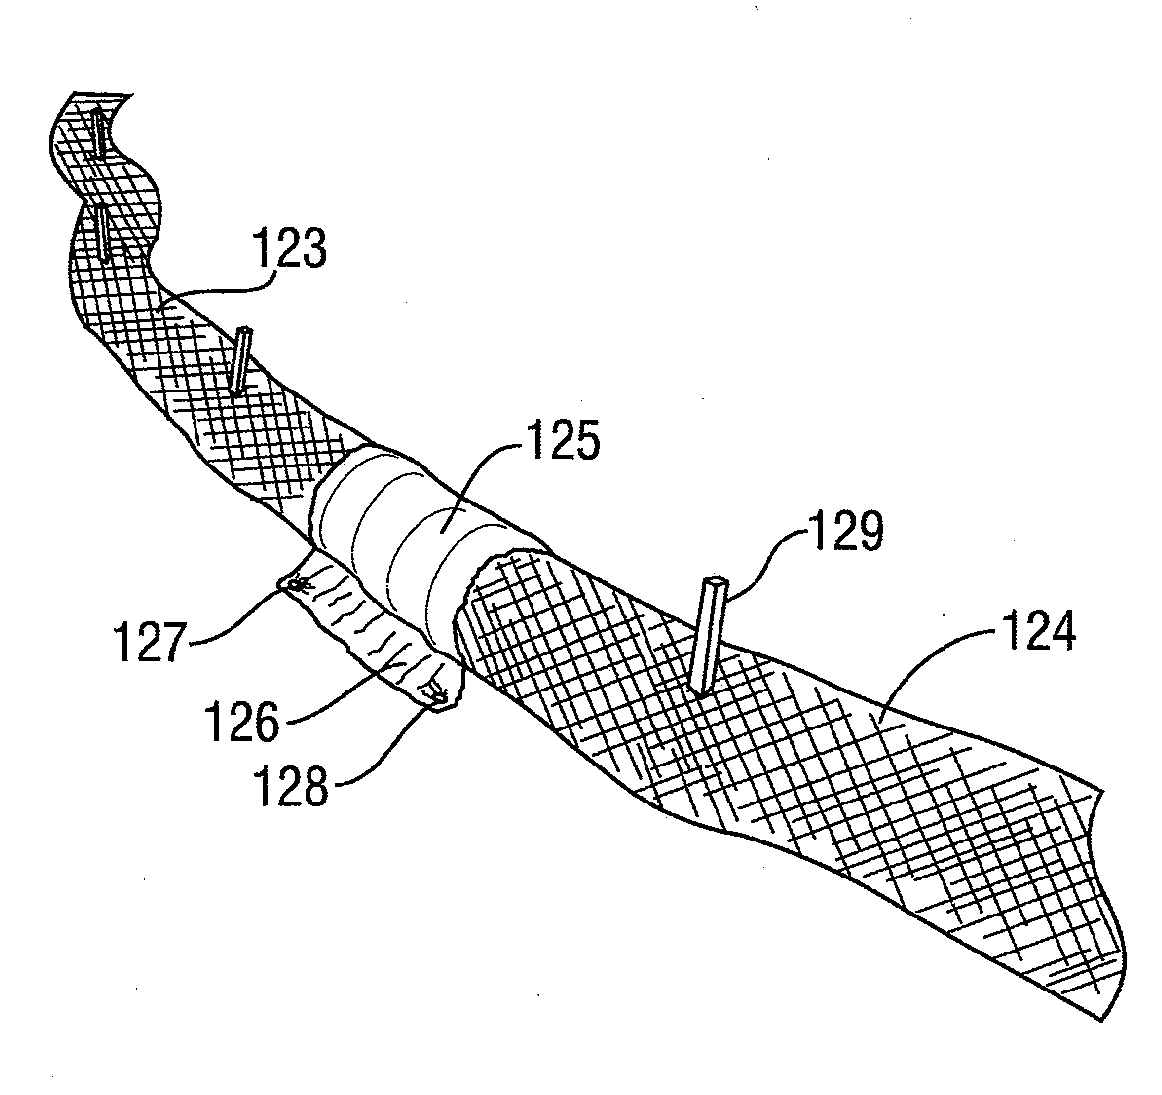 Apparatuses and Methods for Fiber Rolls